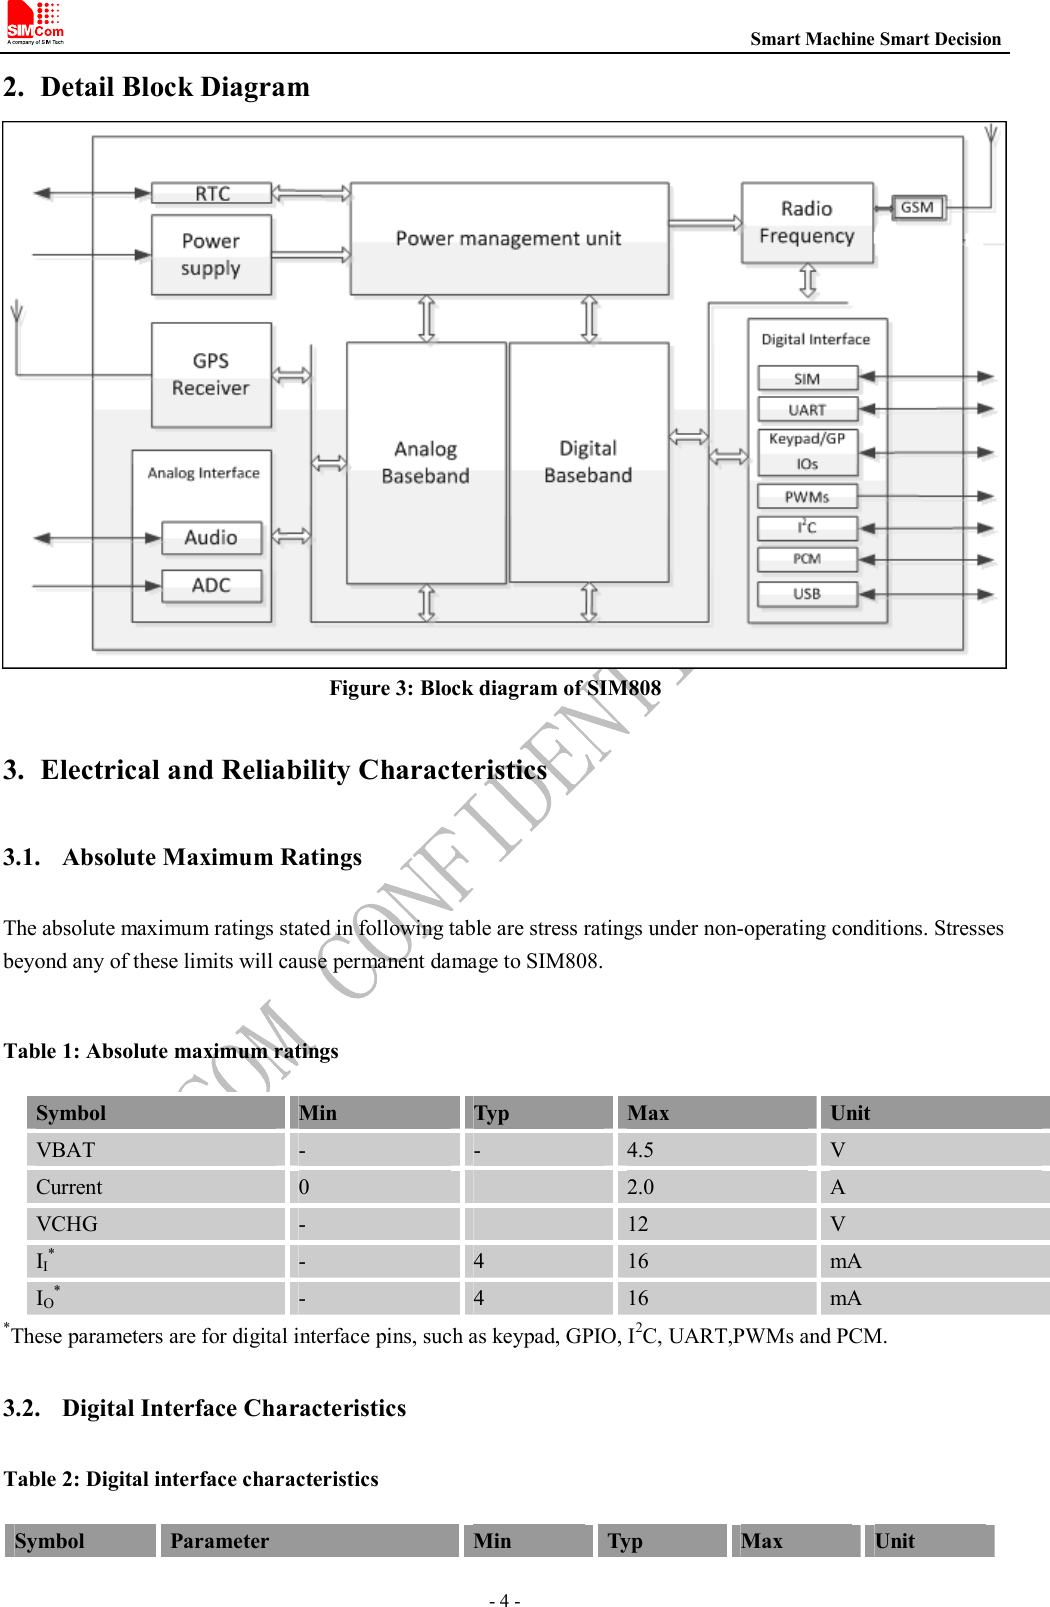                                                                          Smart Machine Smart Decision - 4 - 2. Detail Block Diagram  Figure 3: Block diagram of SIM808  3. Electrical and Reliability Characteristics 3.1. Absolute Maximum Ratings The absolute maximum ratings stated in following table are stress ratings under non-operating conditions. Stresses beyond any of these limits will cause permanent damage to SIM808.  Table 1: Absolute maximum ratings Symbol  Min  Typ  Max  Unit VBAT  -  -  4.5  V Current  0    2.0  A VCHG  -    12  V II*  -  4  16  mA IO*  -  4  16  mA *These parameters are for digital interface pins, such as keypad, GPIO, I2C, UART,PWMs and PCM. 3.2. Digital Interface Characteristics Table 2: Digital interface characteristics Symbol  Parameter  Min  Typ  Max  Unit 